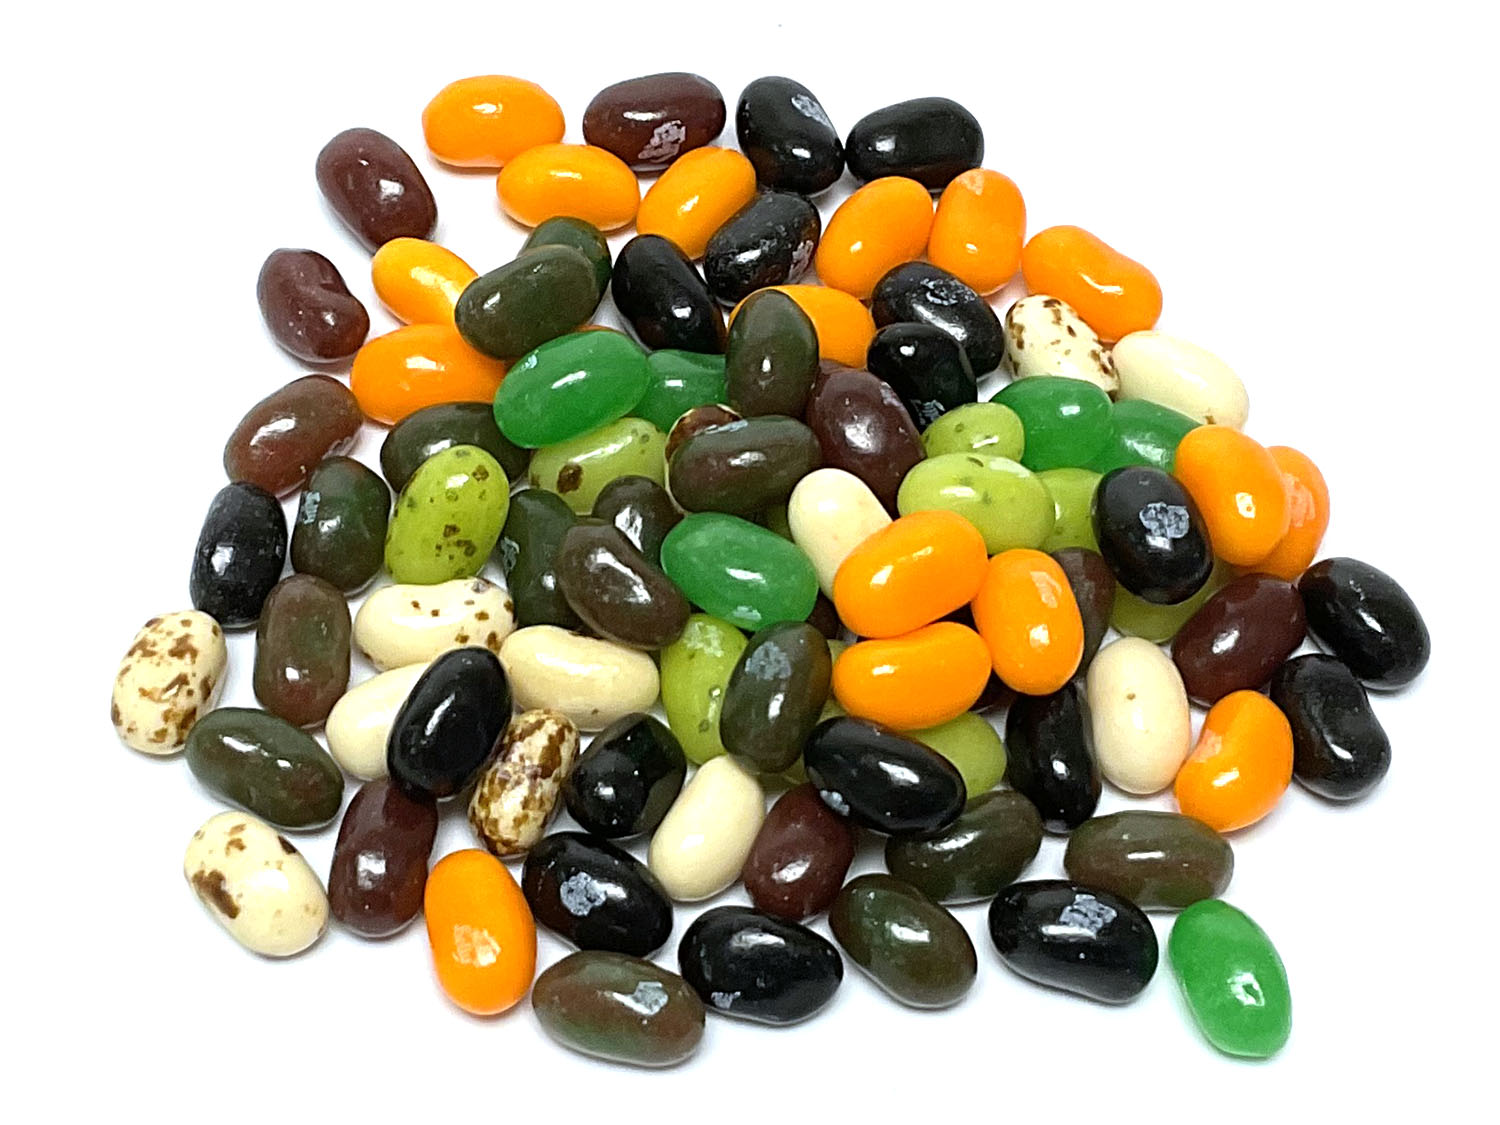 Jelly Belly Camo Beans - 1 oz pack - box of 30